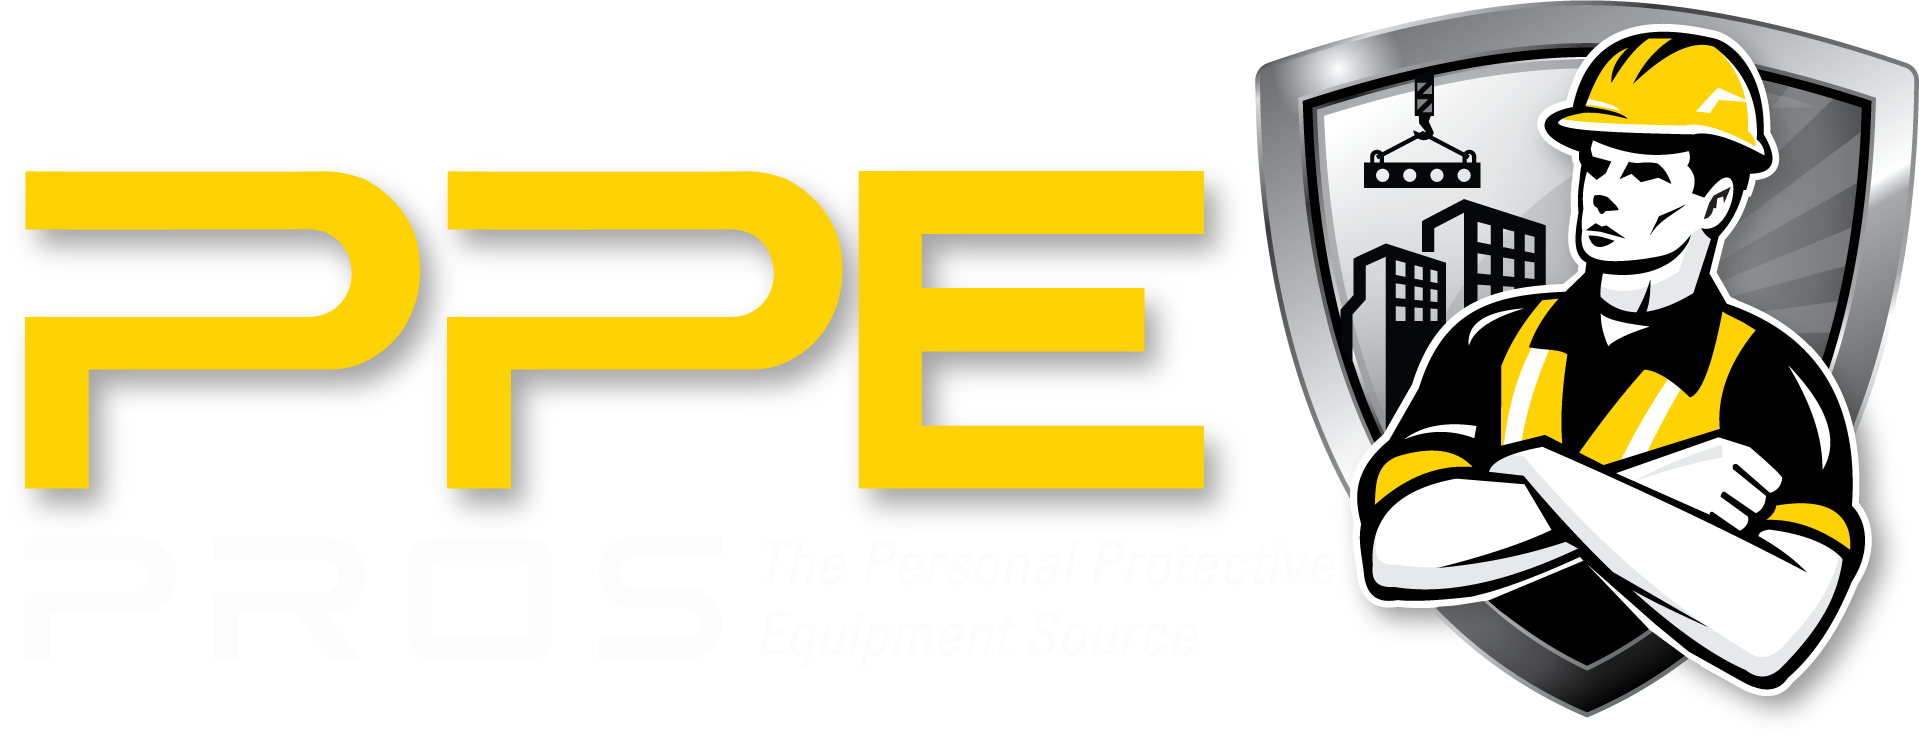 Ppepros - Ppe, Transparent background PNG HD thumbnail